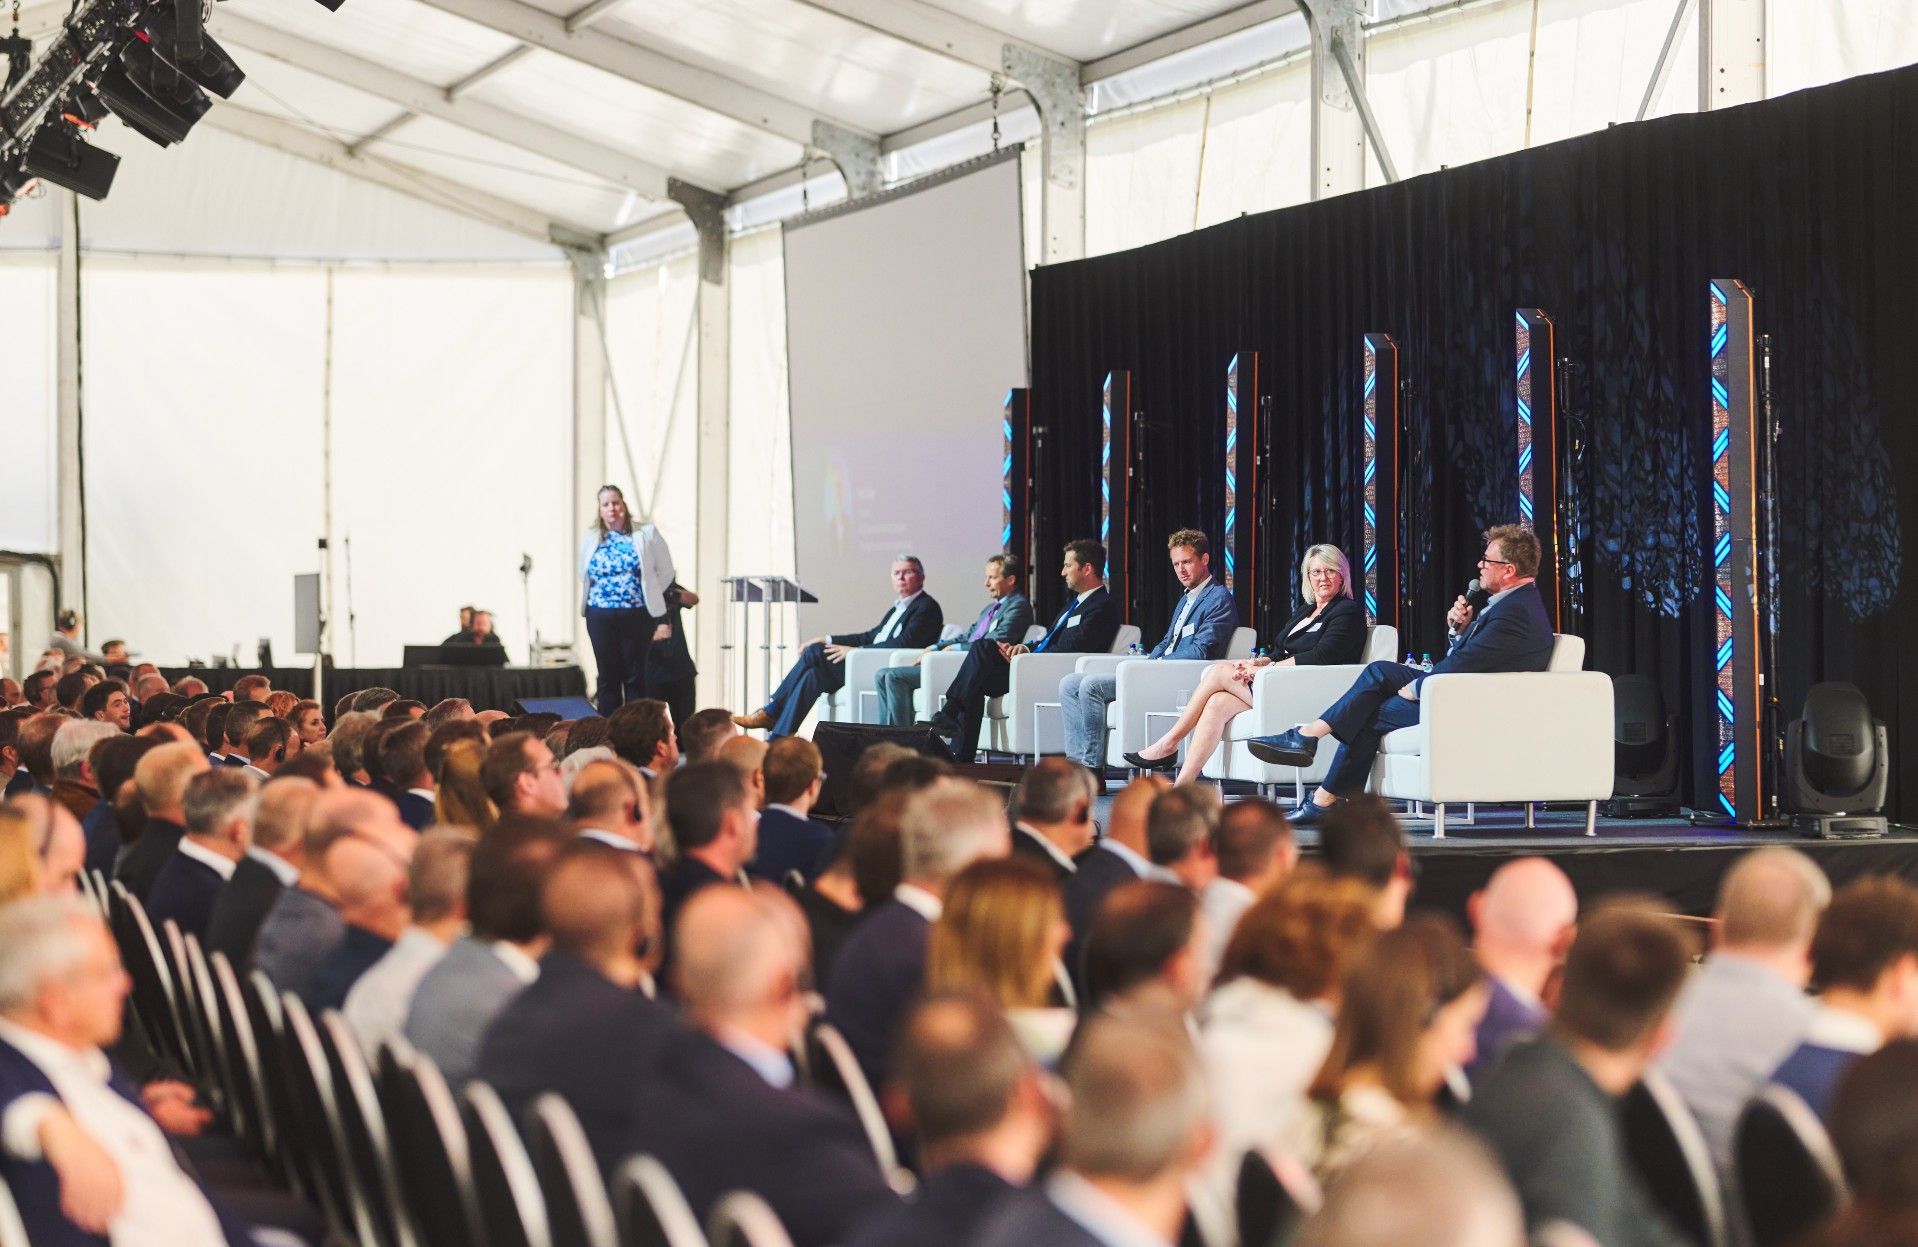 PRGCrew provided a comprehensive event service for Infrabel's second edition, featuring Belgian athletes, advanced technology, and expressing gratitude for the transparent partnership.